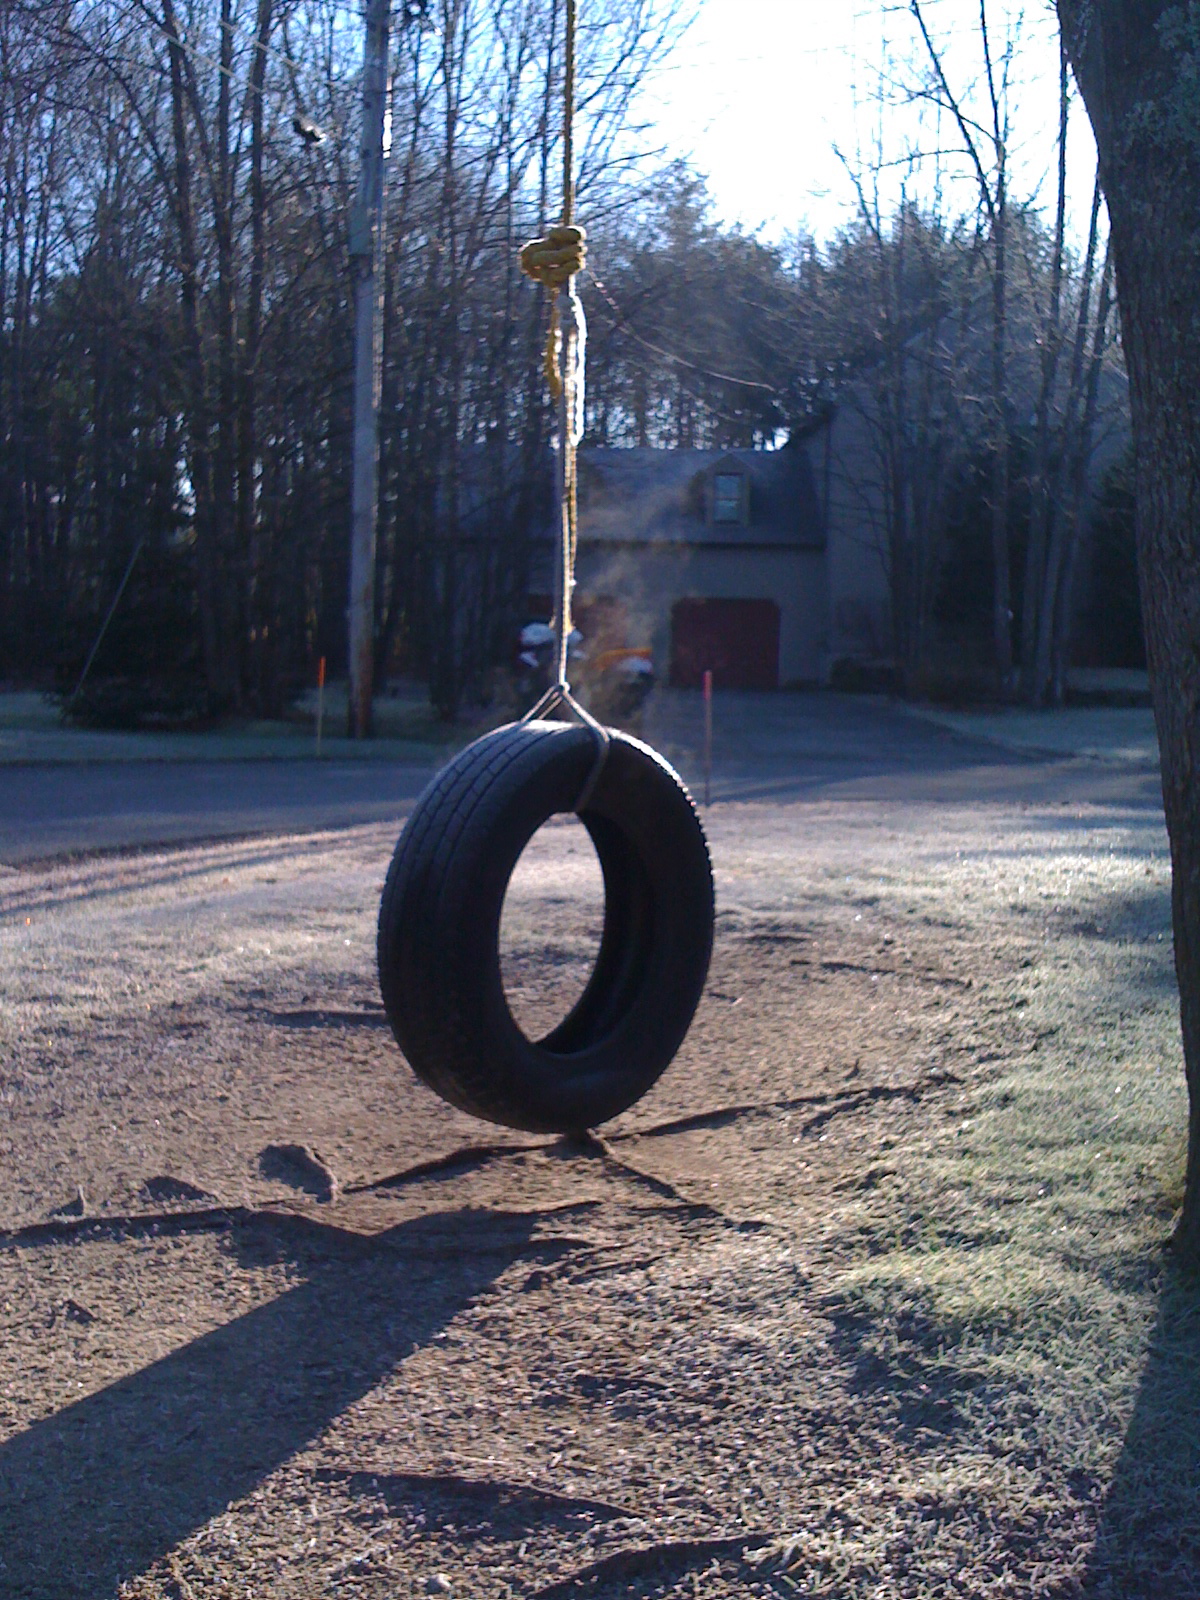 a tire swing that is suspended in a yard